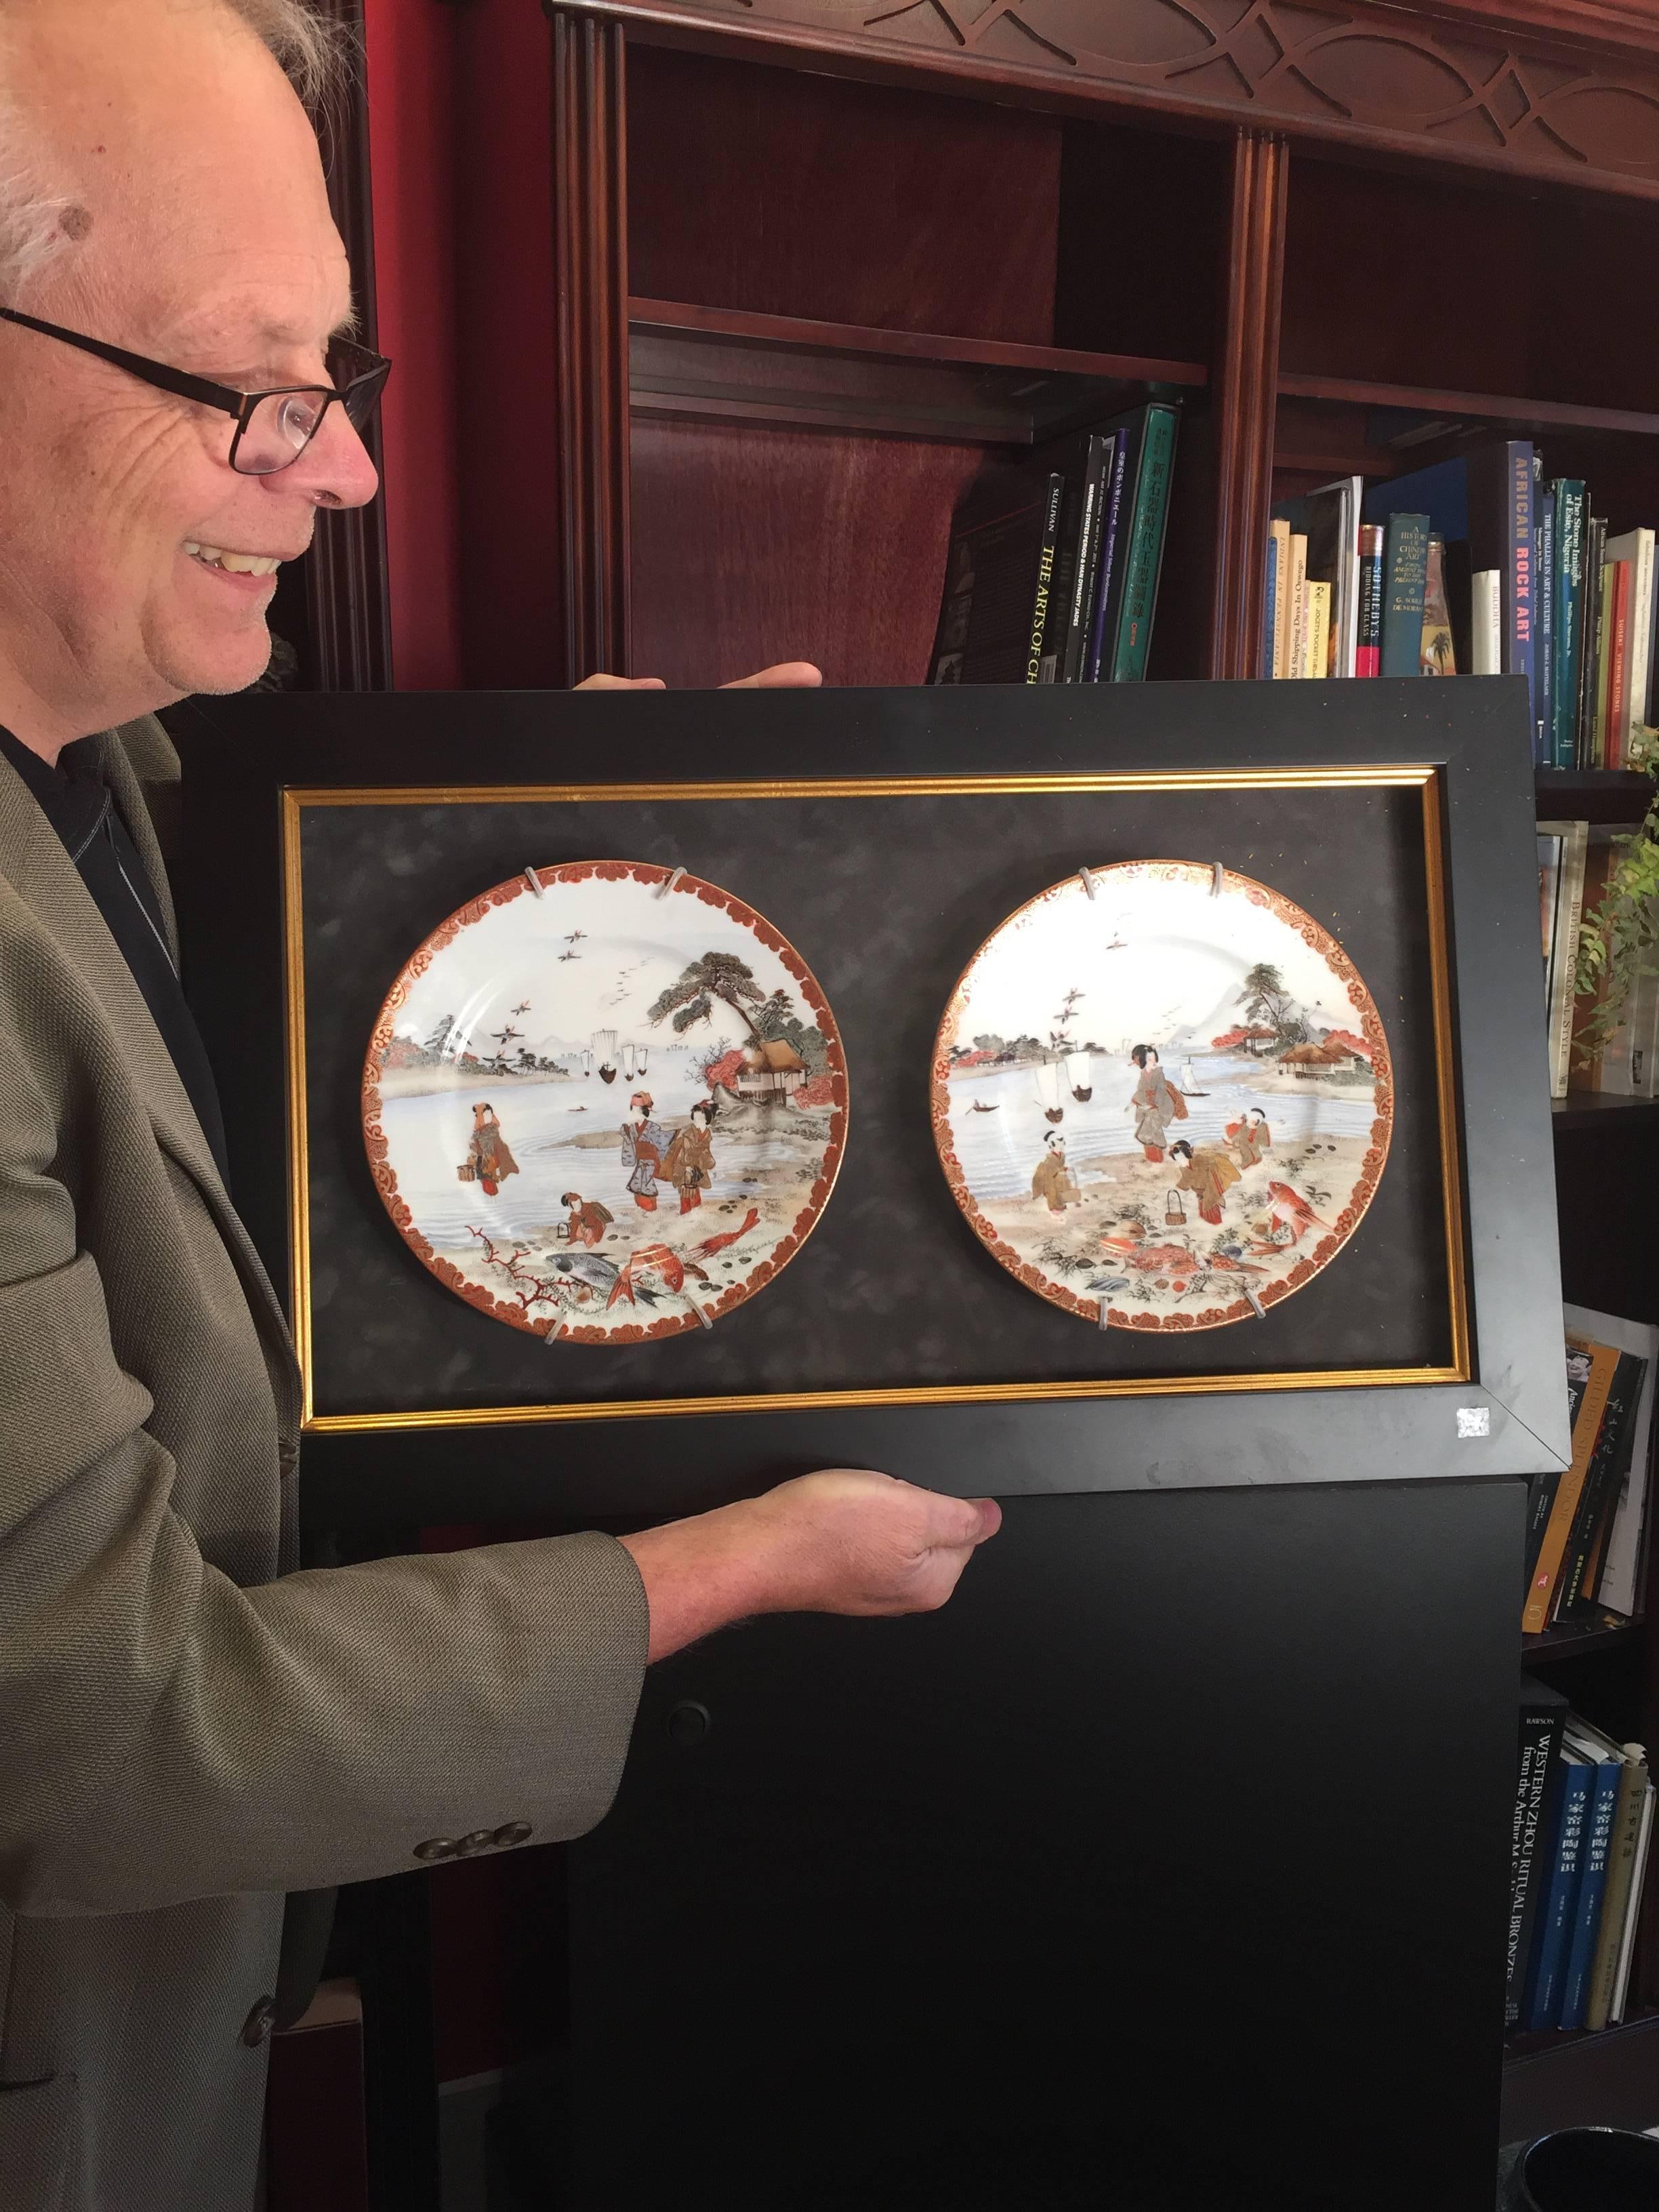 Please look at this superb pair of Japanese Seashore hand-painted plates, beautifully framed, Kutani Kiln, fine condition. 

Gorgeous detail and color. Hard to find.

Dimensions: Plates each 8 inchesdiameter, frame 16 inches high and 24 inches